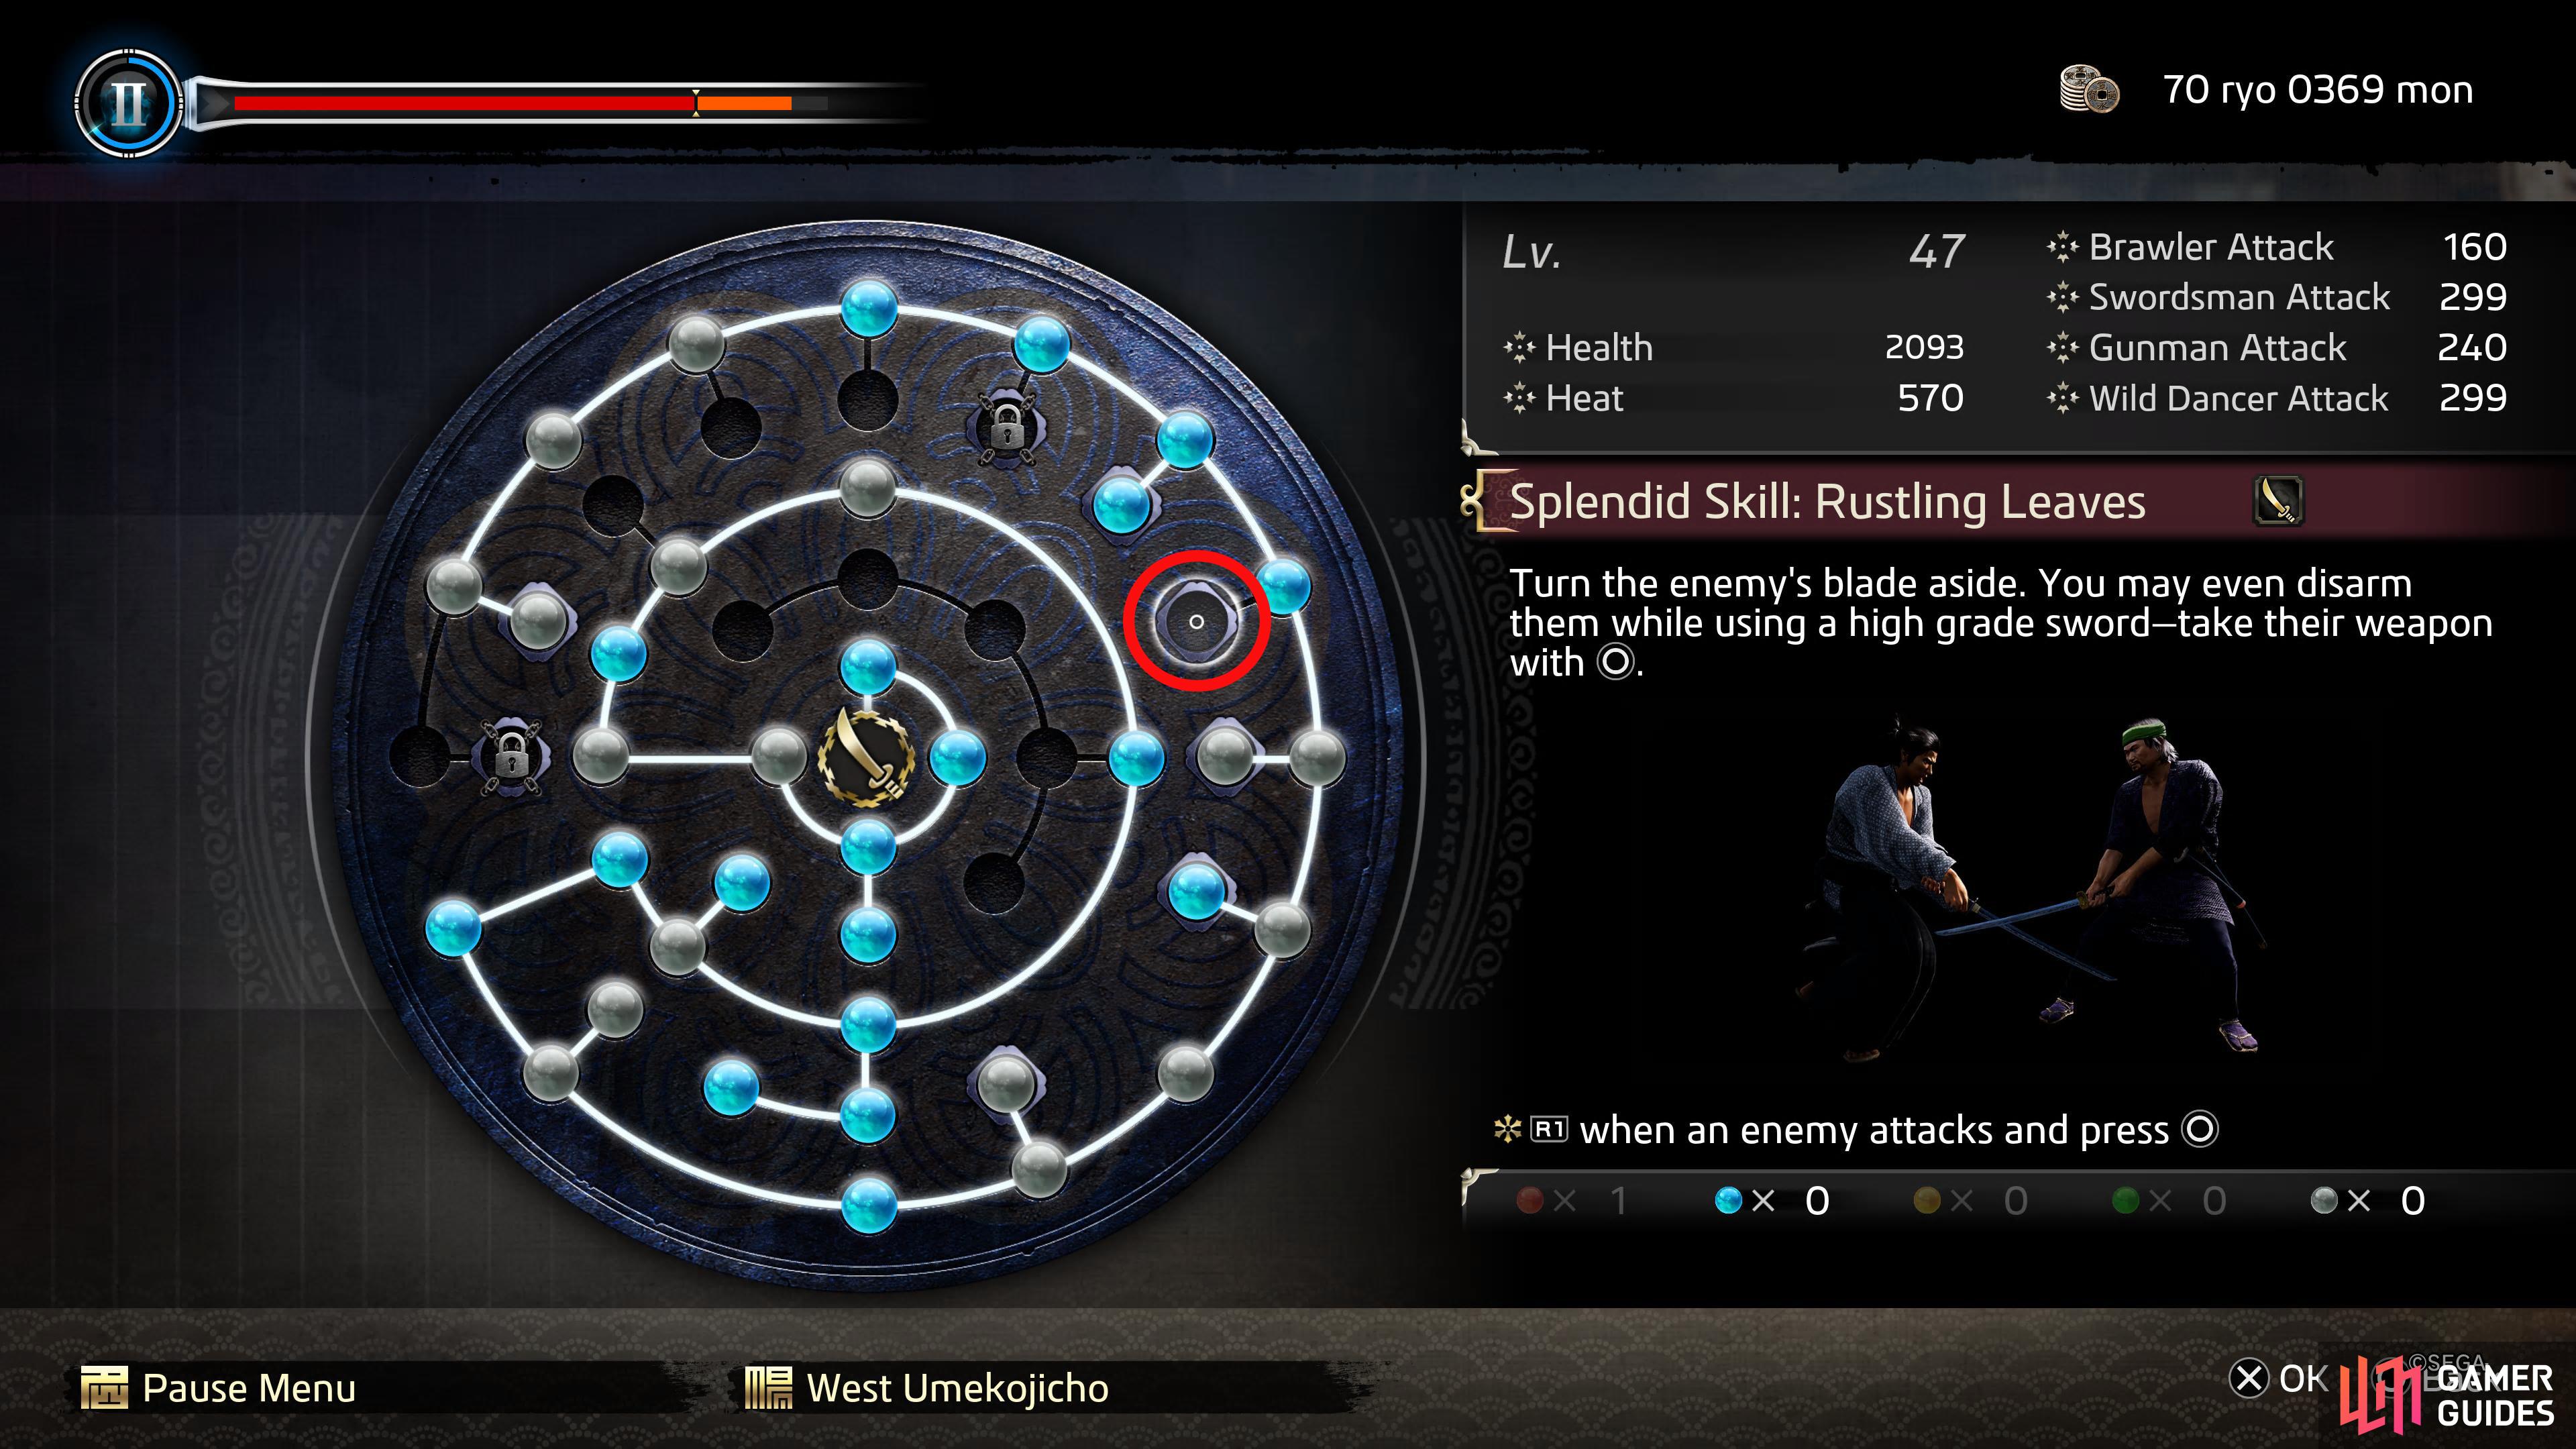 Here is where Rustling Leaves appears on the Ability Wheel.